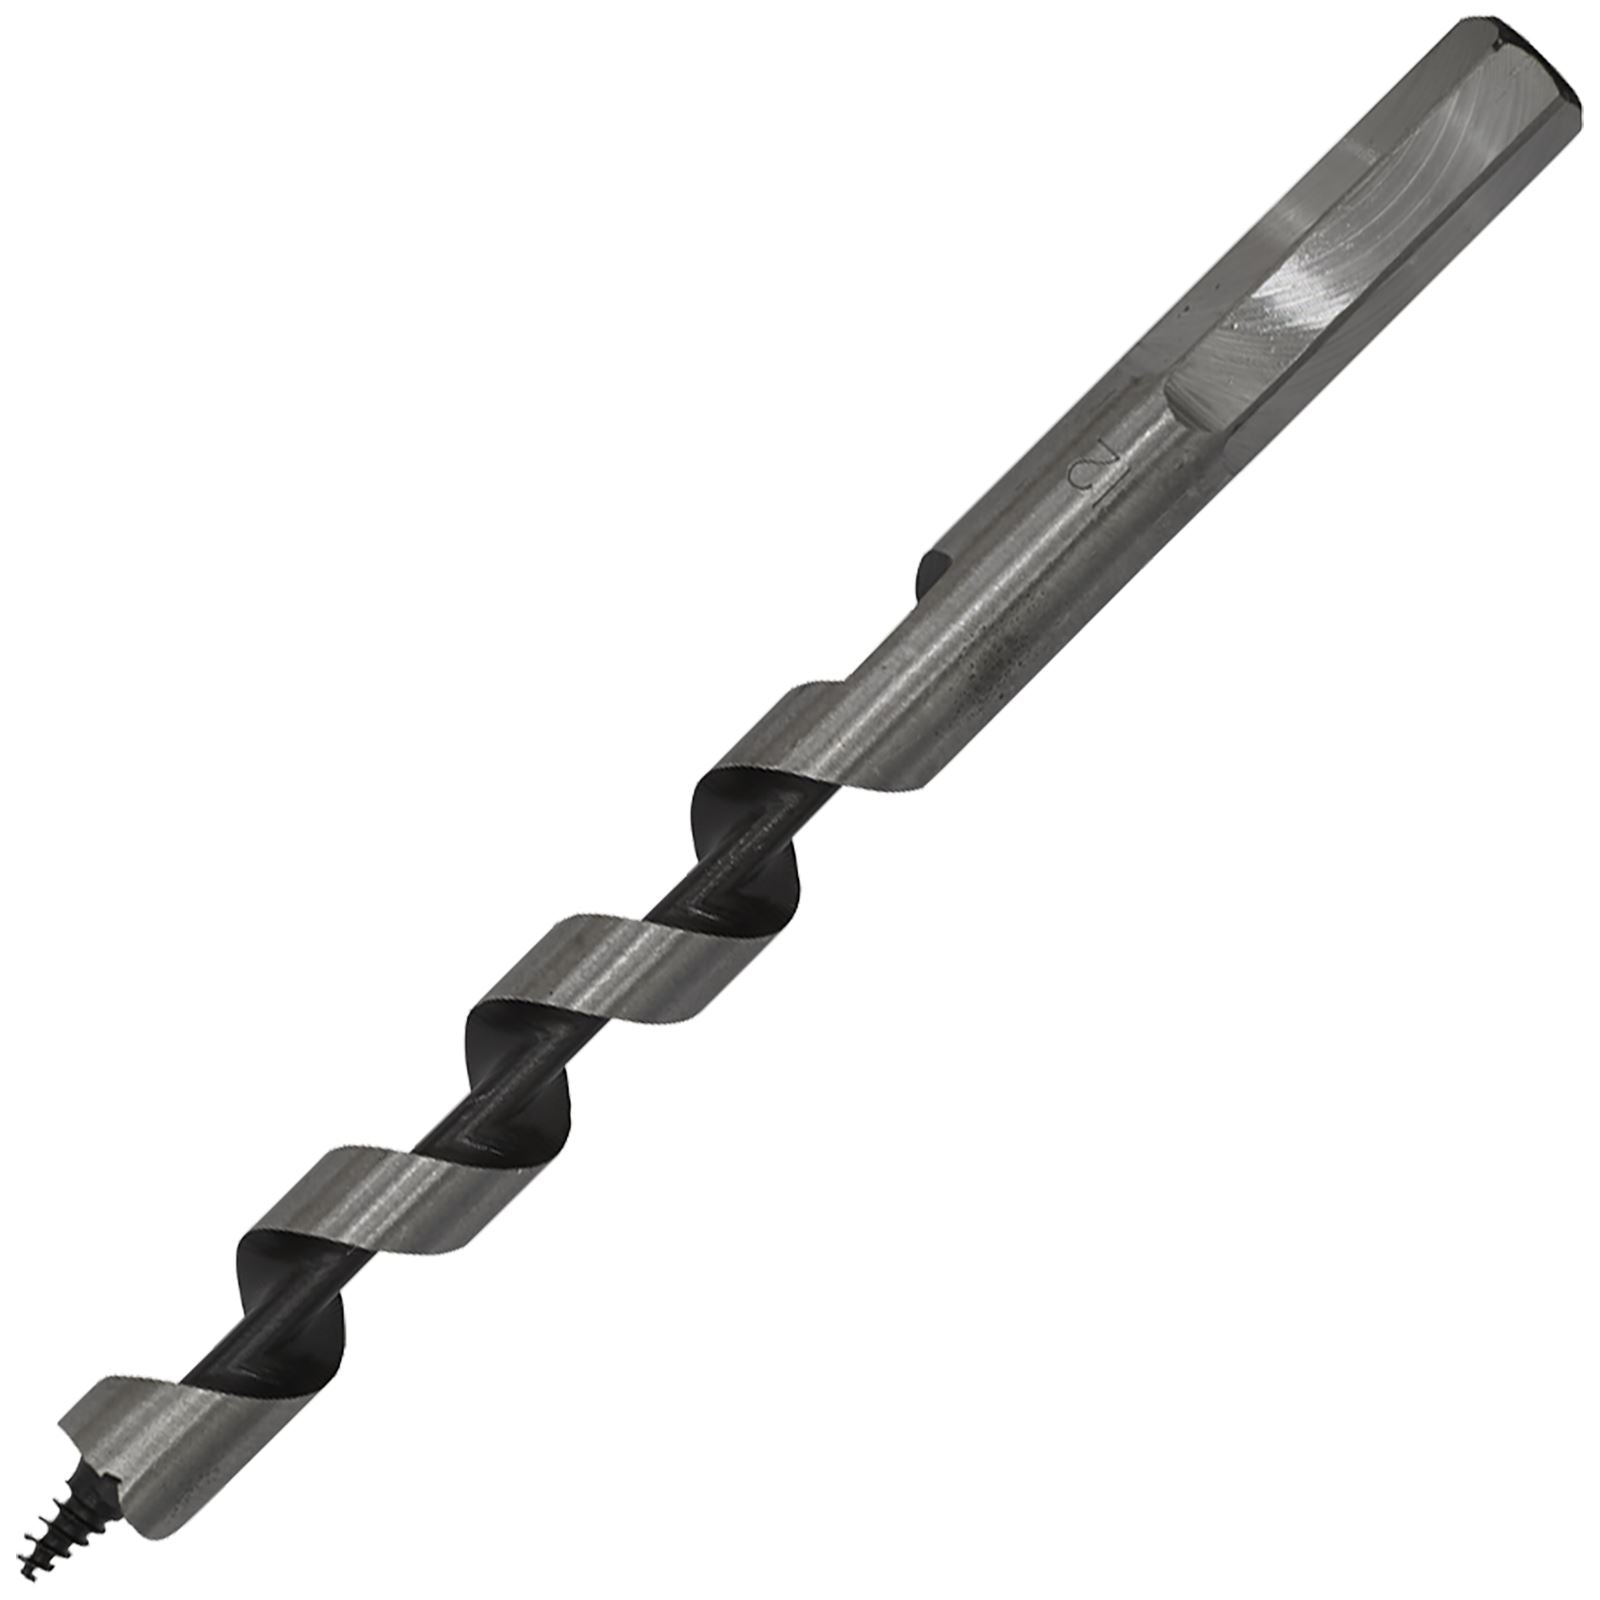 Worksafe by Sealey Auger Wood Drill Bit 12mm x 155mm